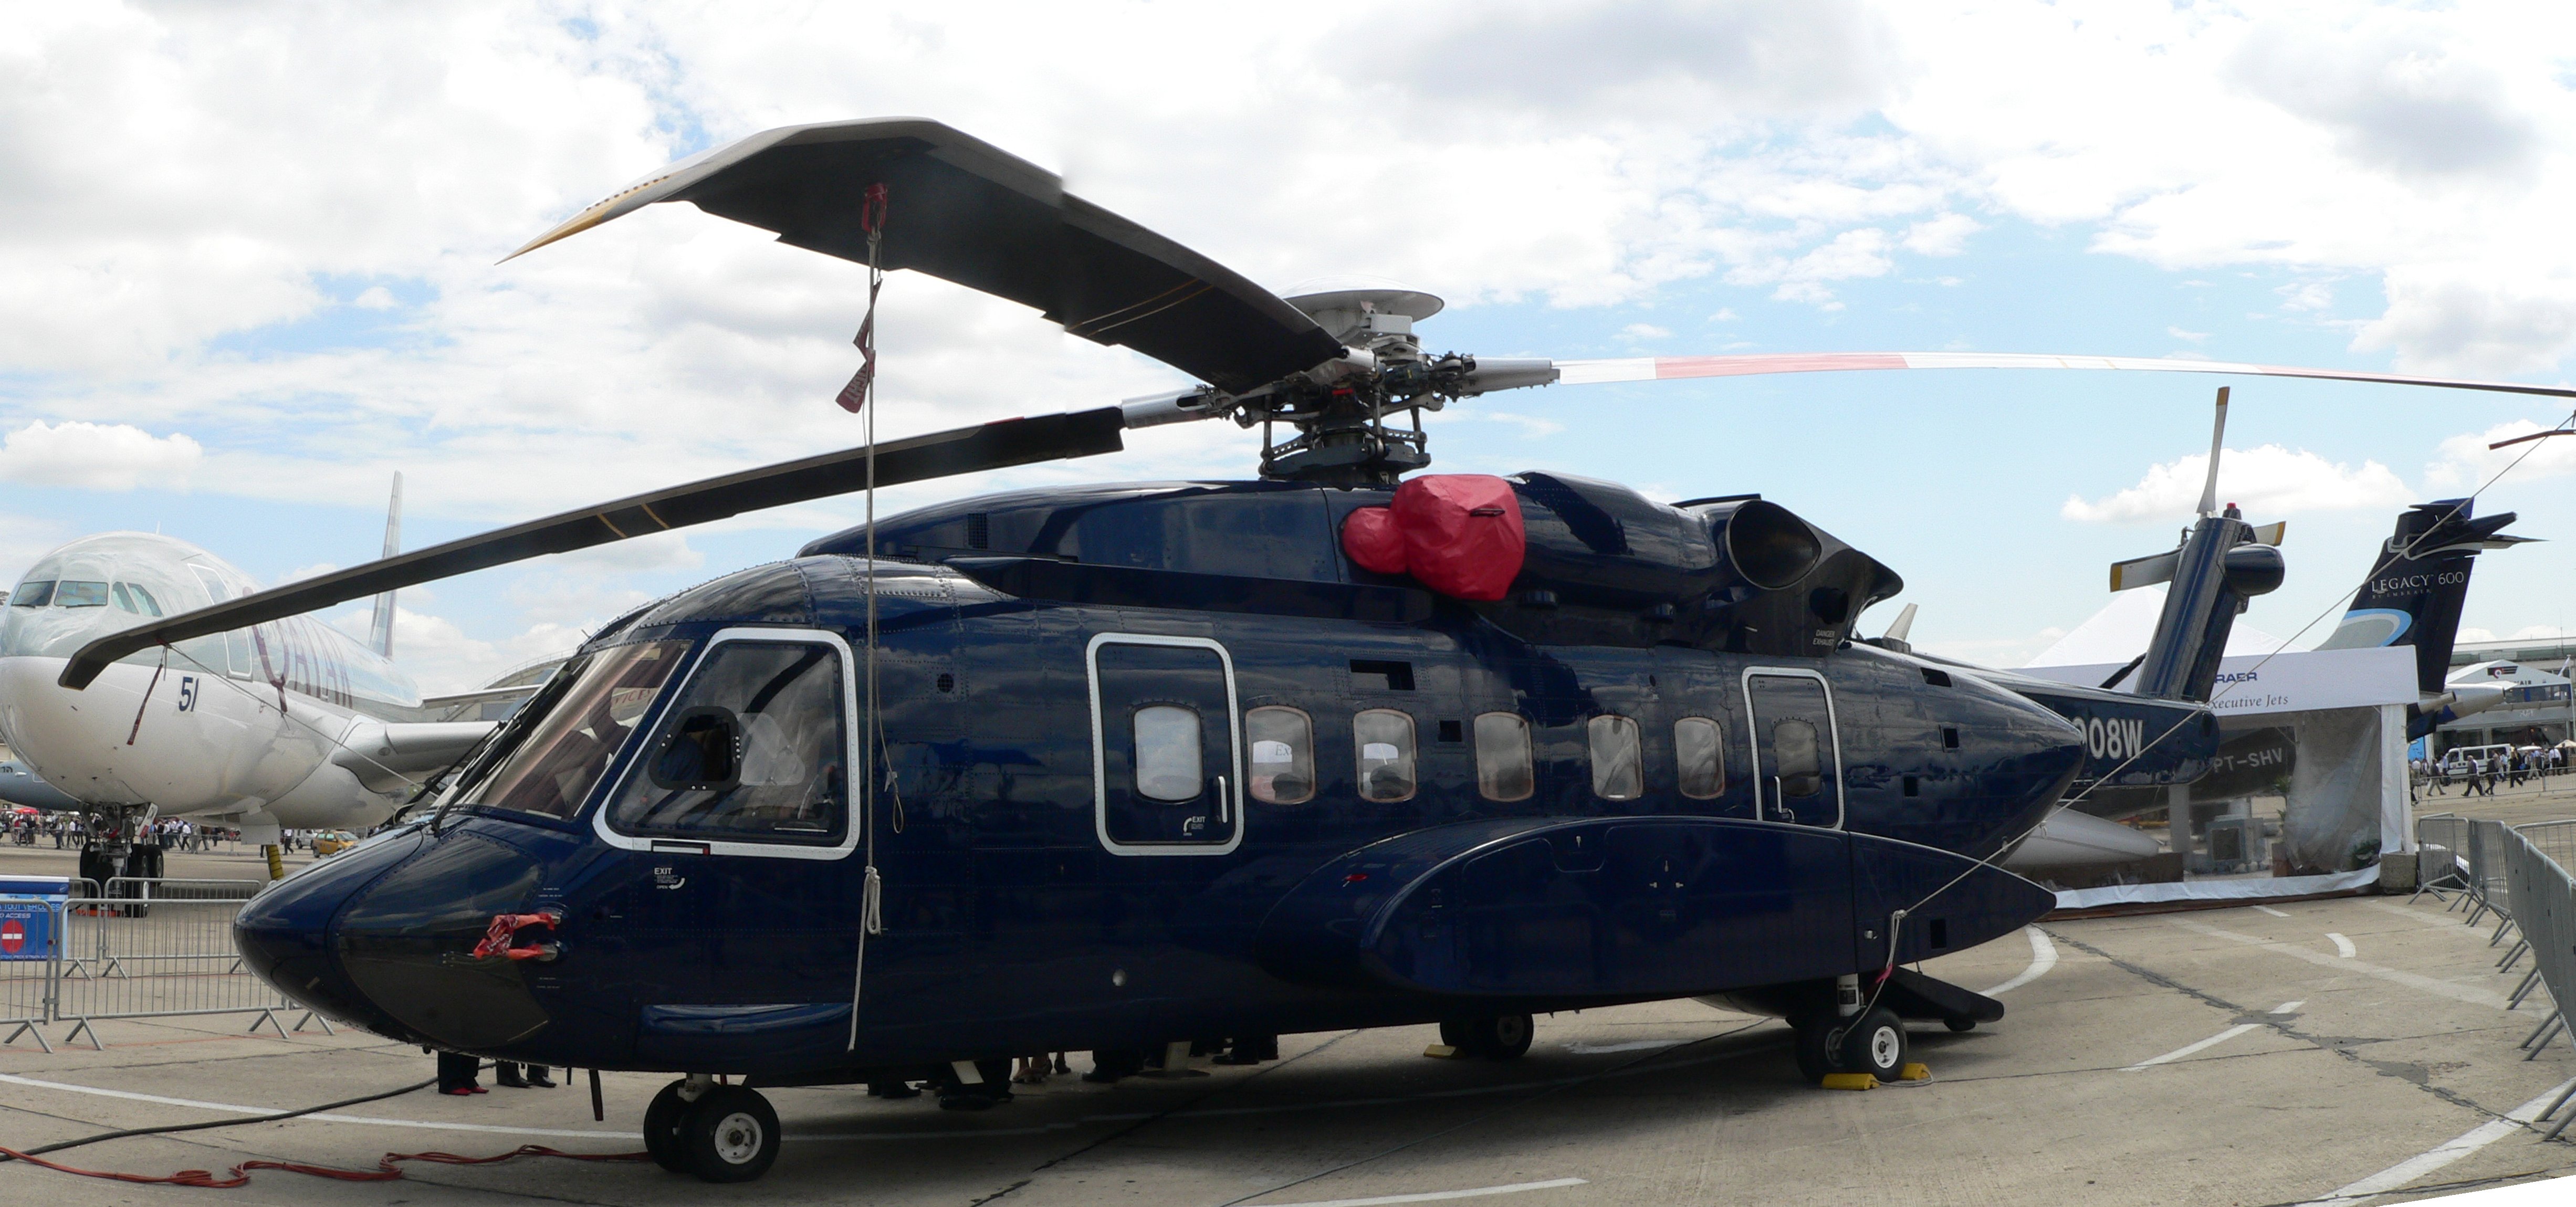 Advanced Features: Discover Cutting-edge Technology in VIP Helicopters